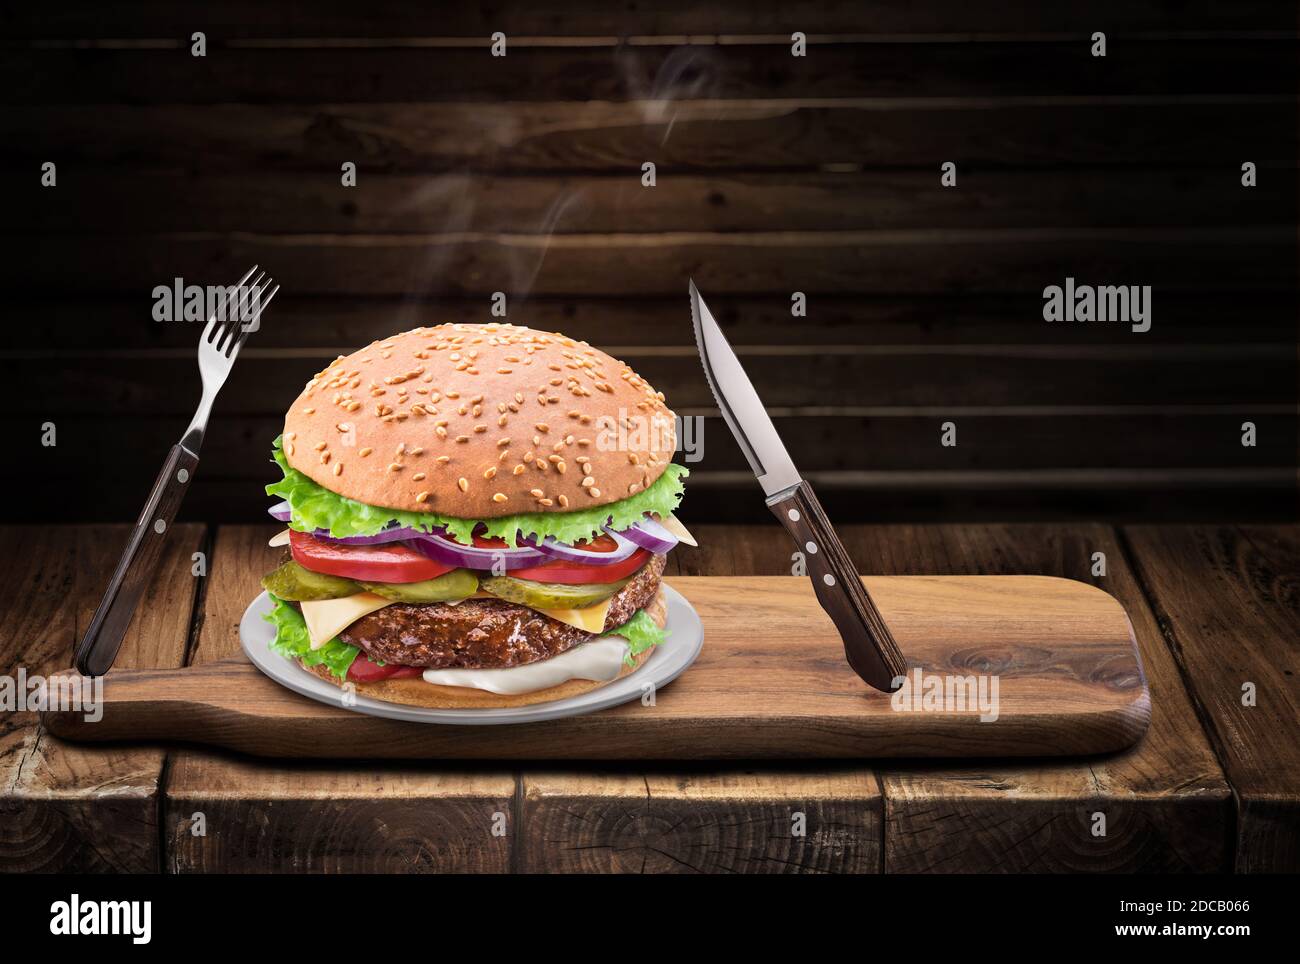 Conceptual photo of typical desired tasty hot homemade burger or cheeseburger on wood table. Knife and fork waiting for dinner. Stock Photo